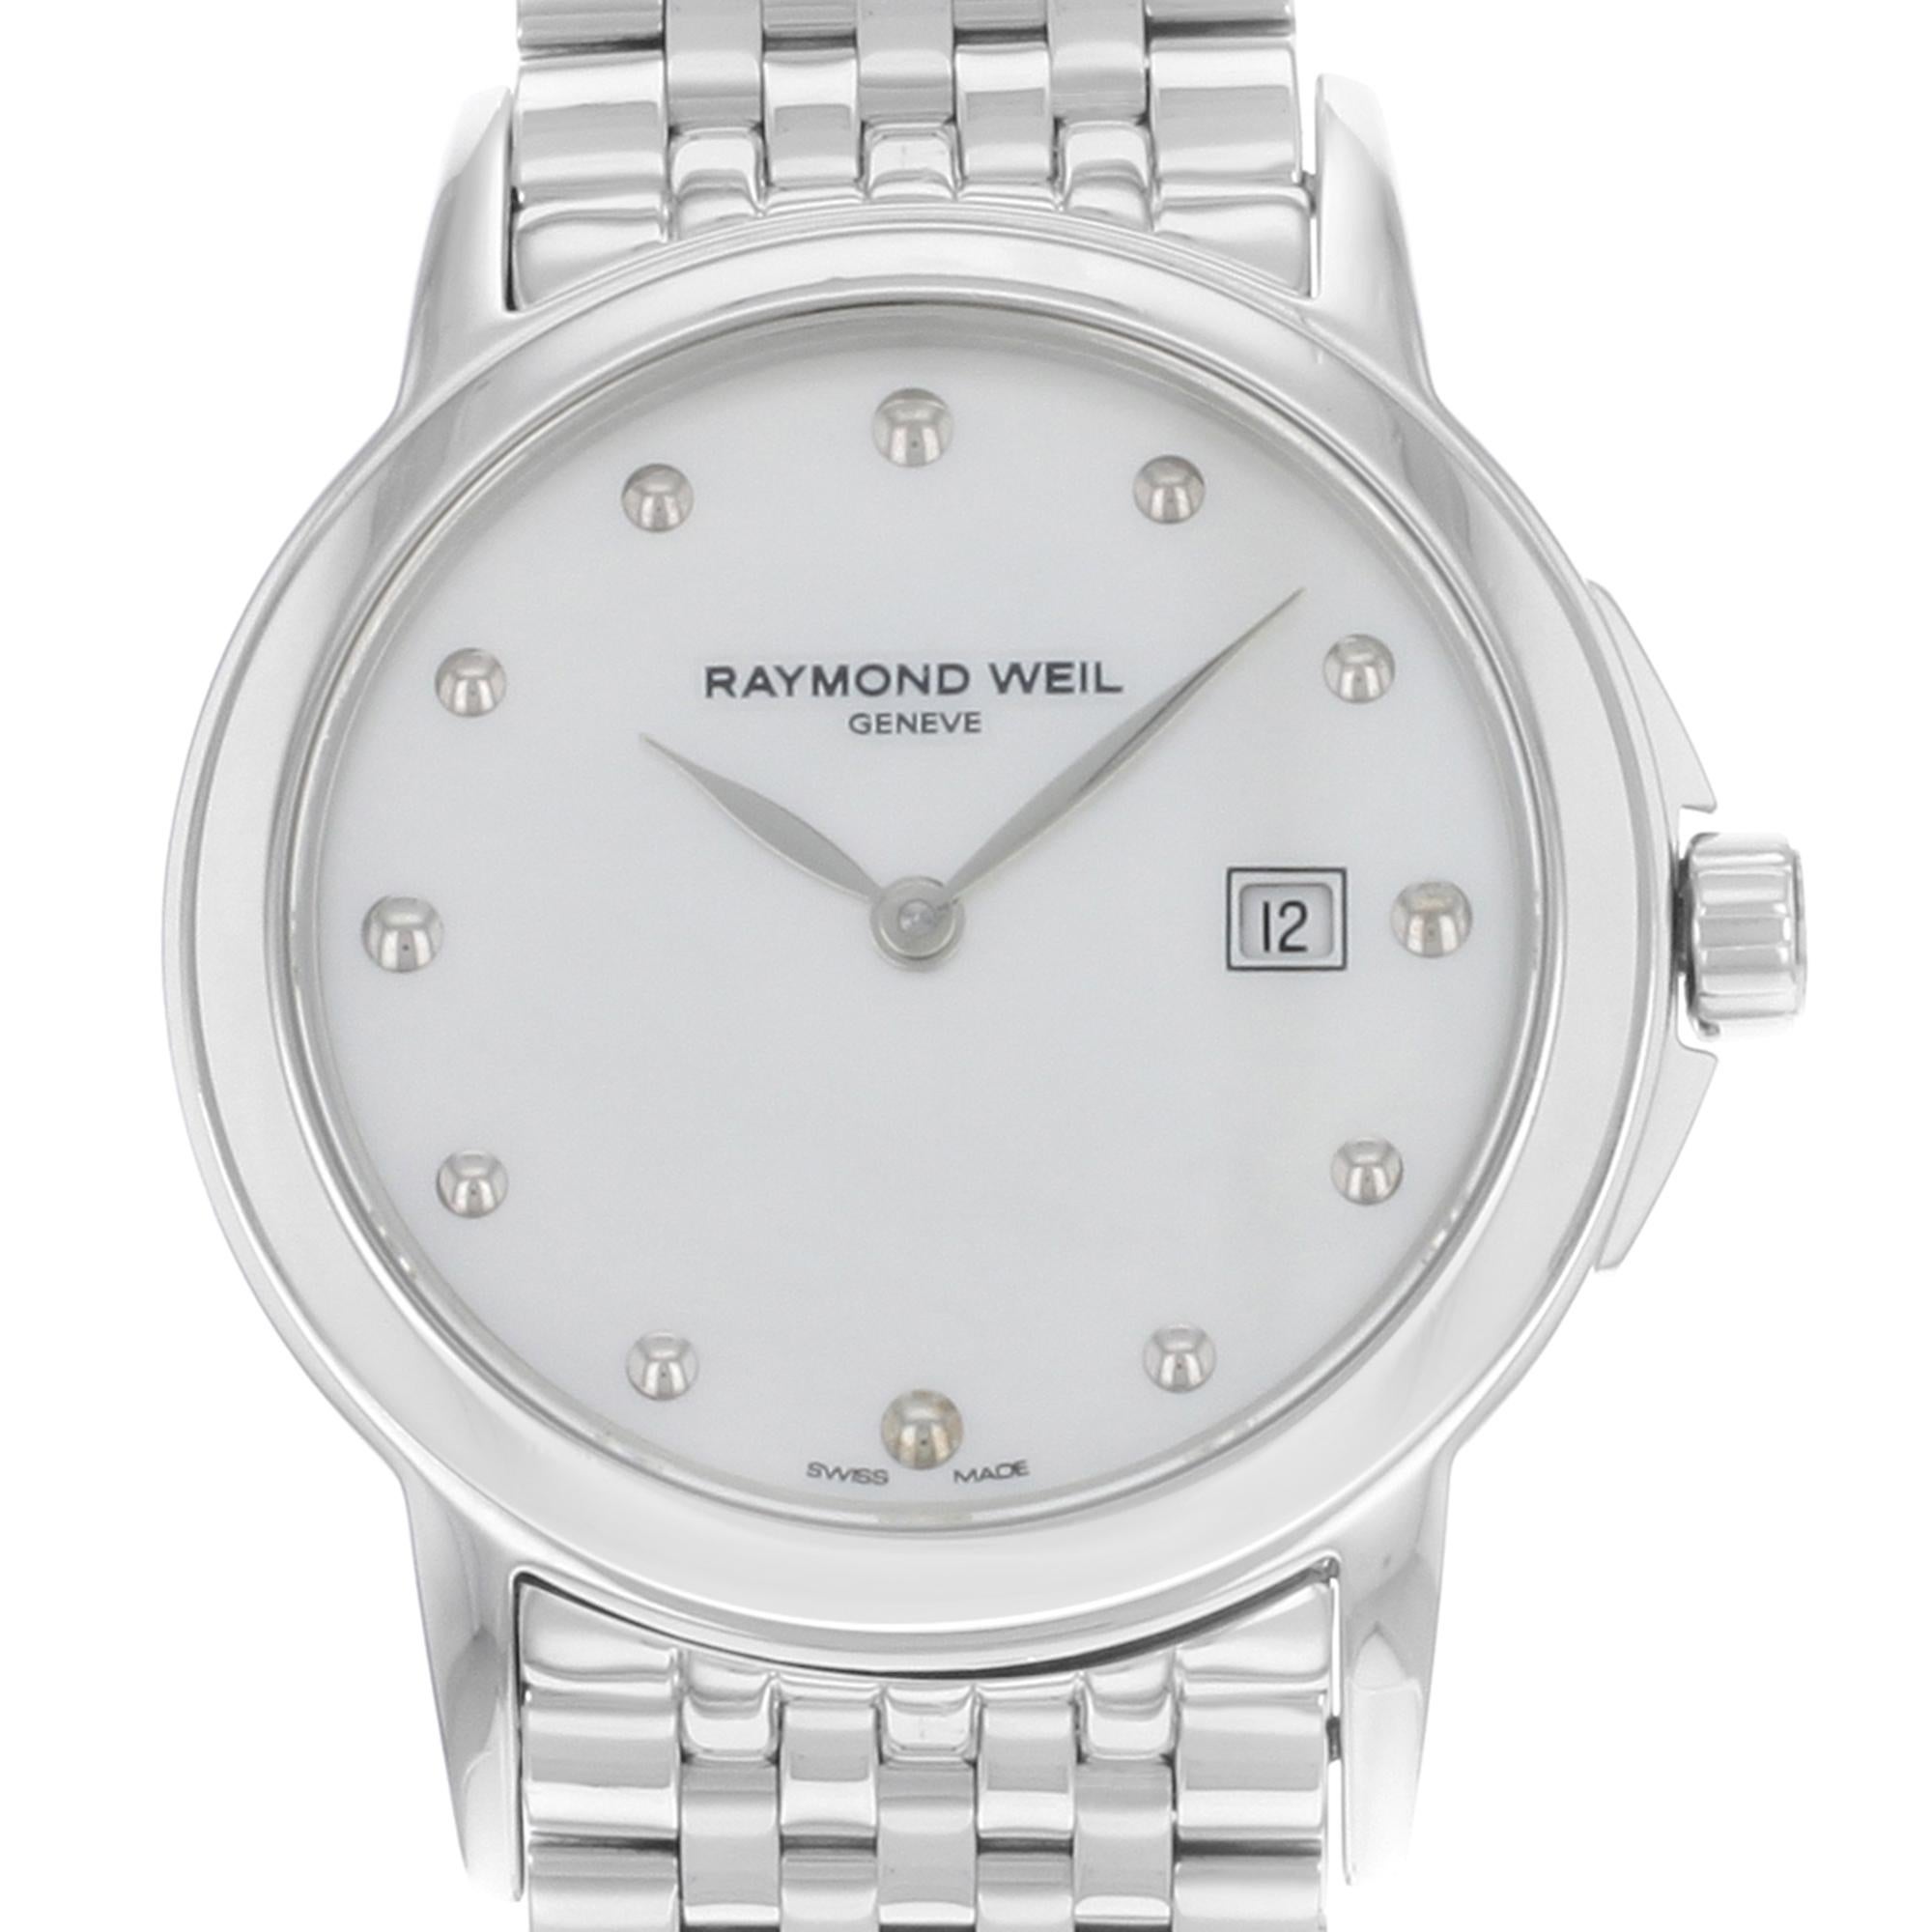 This display model Raymond Weil Tradition  5966-ST-97001  is a beautiful Ladie's timepiece that is powered by quartz (battery) movement which is cased in a stainless steel case. It has a round shape face, date indicator dial and has hand dots style